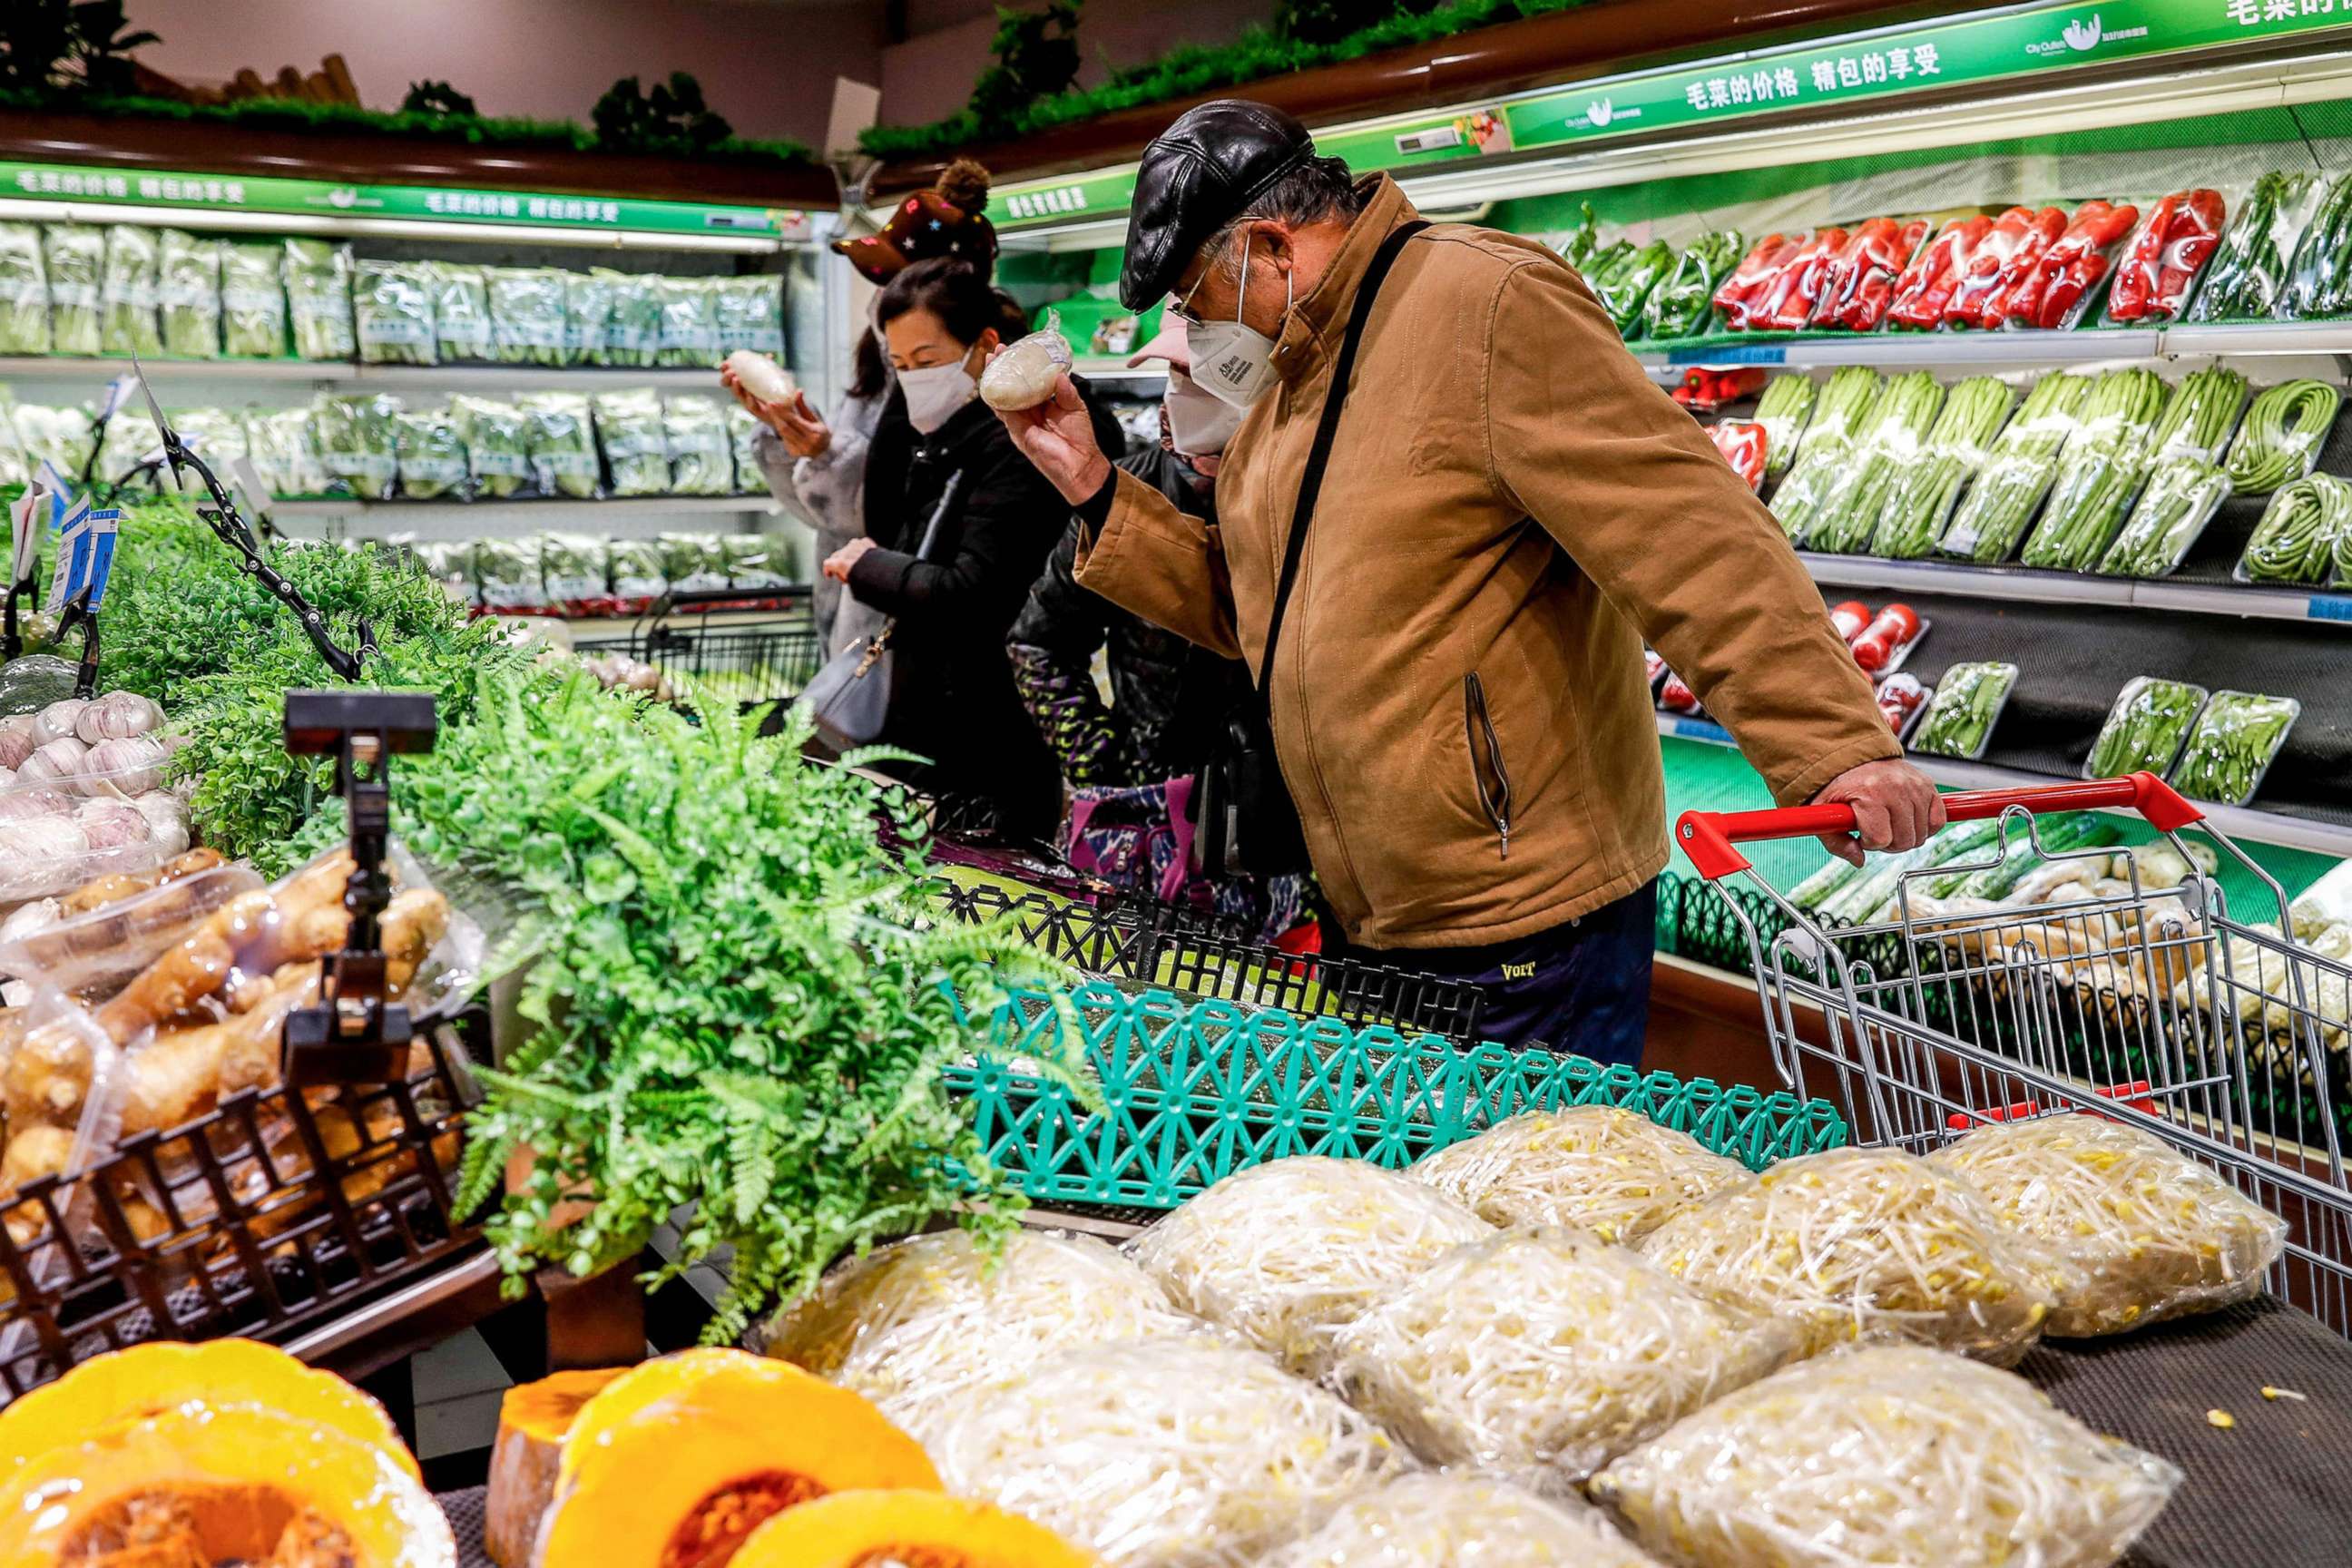 PHOTO: Shoppers are pictured at a supermarket in Urumqi, in China's northwestern Xinjiang region, following the easing of Covid-19 restrictions in the city, Dec. 5, 2022.